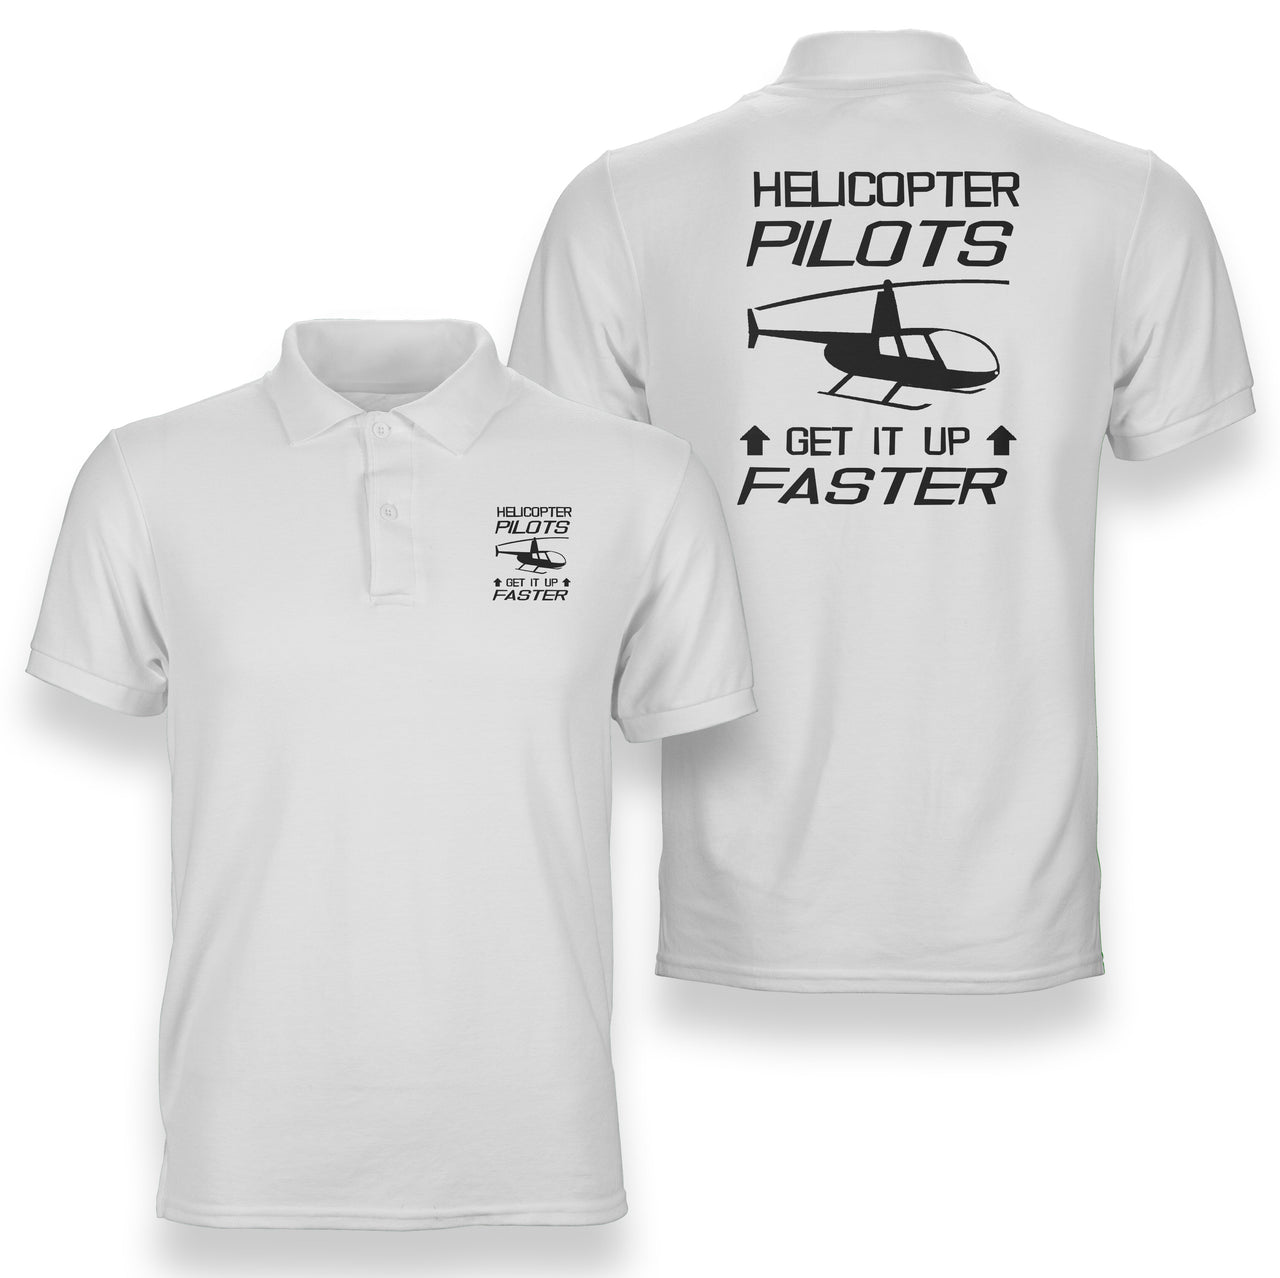 Helicopter Pilots Get It Up Faster Designed Double Side Polo T-Shirts